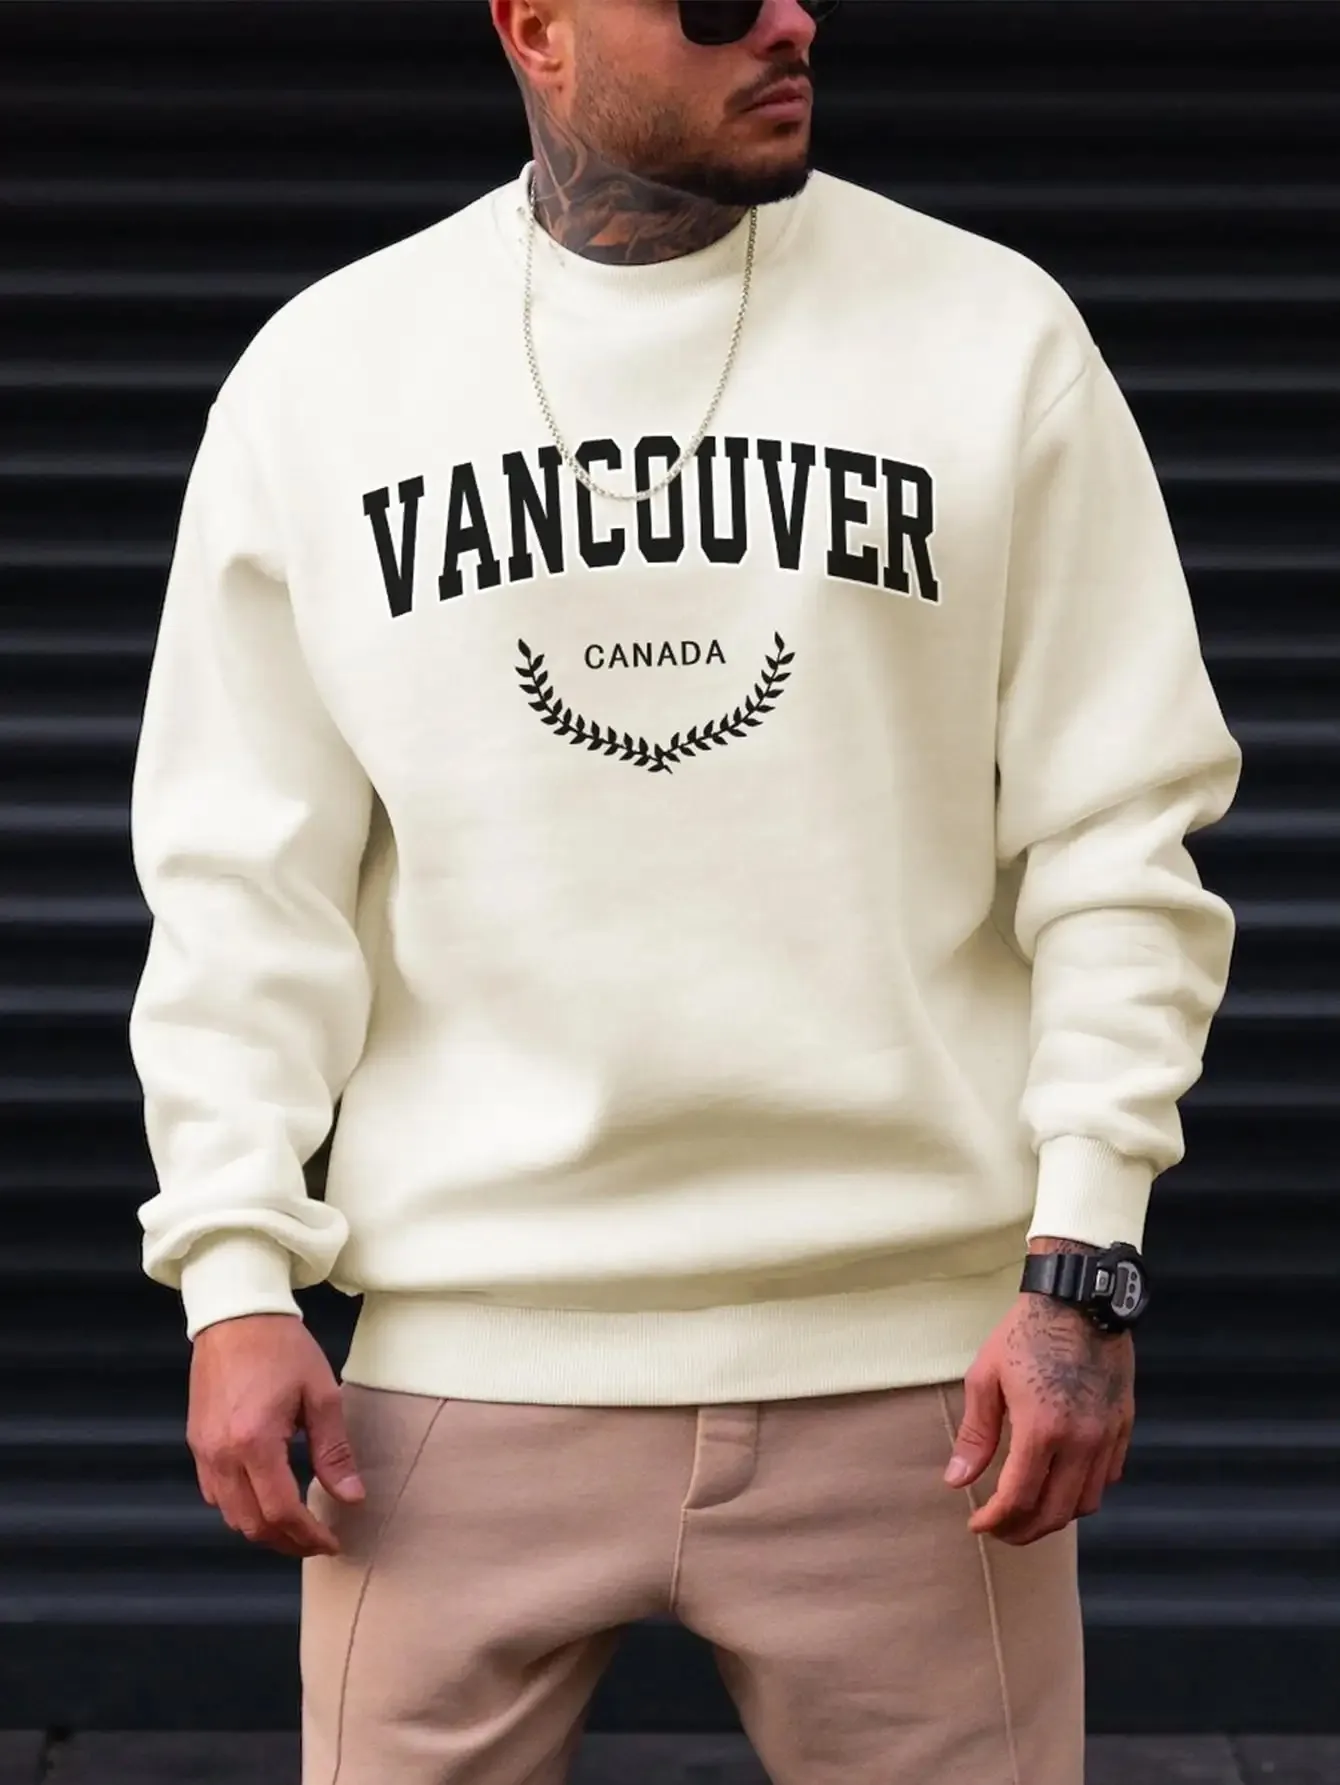 

Vancouver Canada Leaf Design Men's Tops Autumn and Winter New Clothes Street Style Casual Sweatshirts Fashion Hip Hop Men's Spor